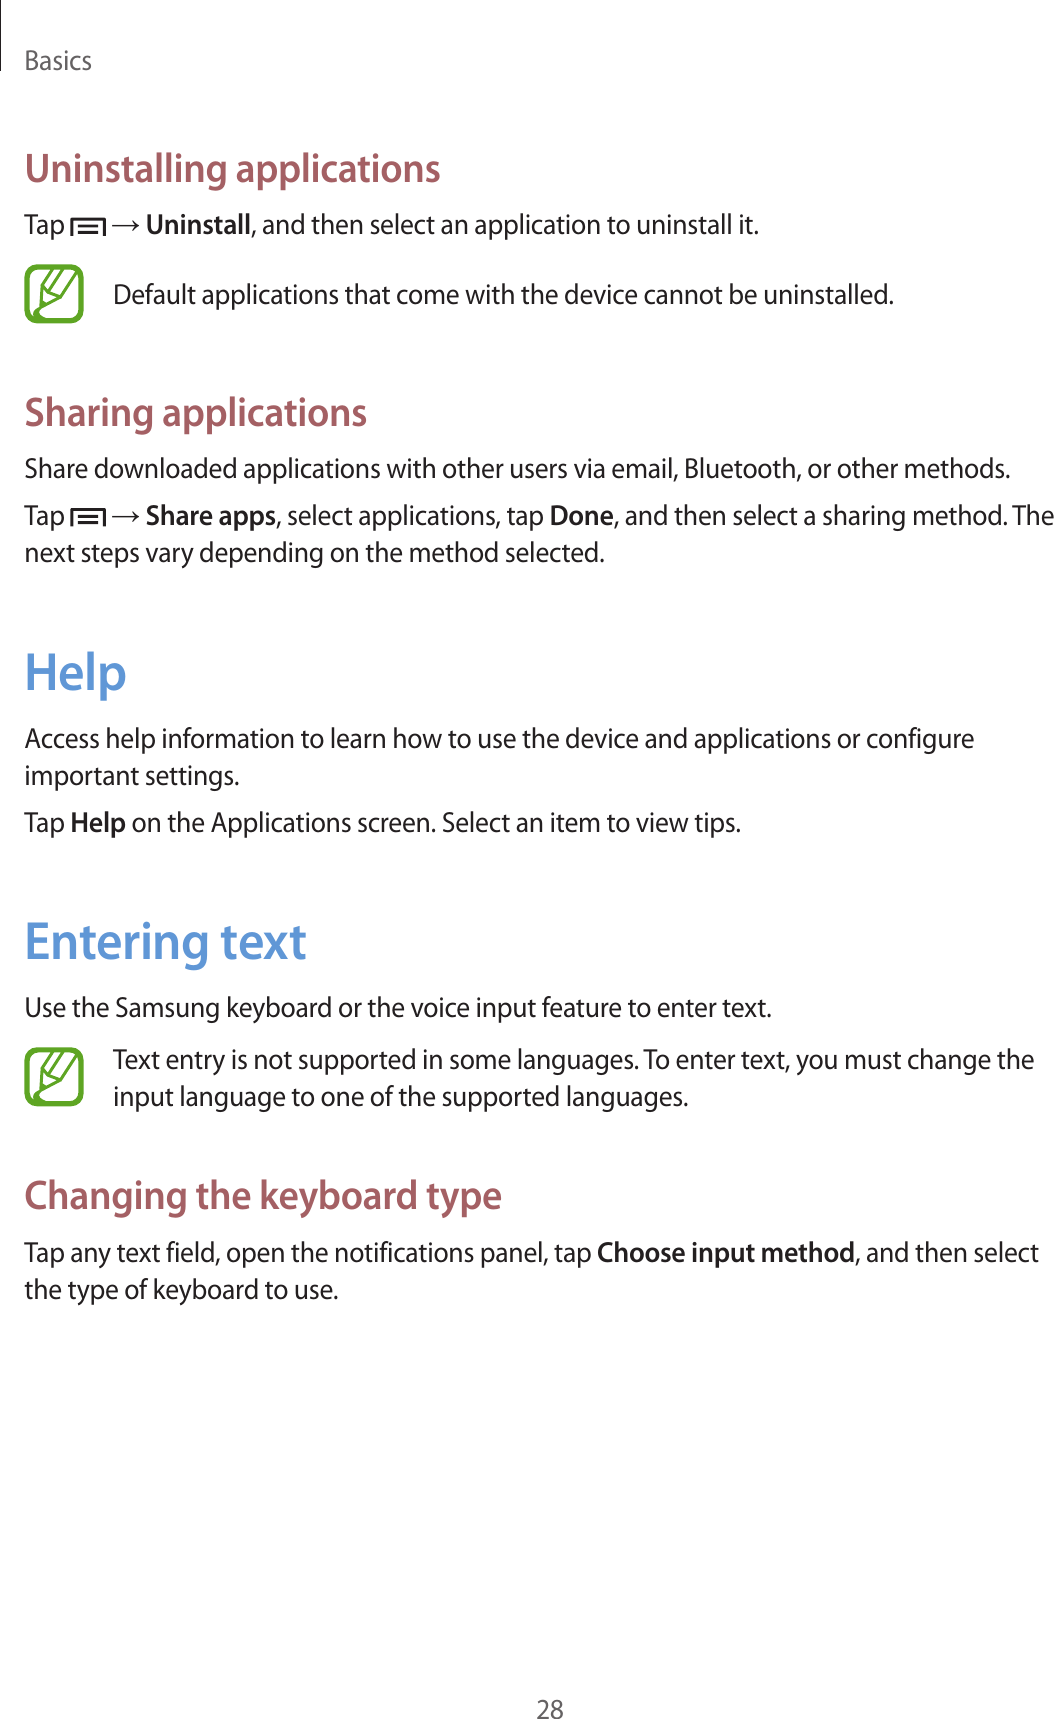 Basics28Uninstalling applicationsTap   → Uninstall, and then select an application to uninstall it.Default applications that come with the device cannot be uninstalled.Sharing applicationsShare downloaded applications with other users via email, Bluetooth, or other methods.Tap   → Share apps, select applications, tap Done, and then select a sharing method. The next steps vary depending on the method selected.HelpAccess help information to learn how to use the device and applications or configure important settings.Tap Help on the Applications screen. Select an item to view tips.Entering textUse the Samsung keyboard or the voice input feature to enter text.Text entry is not supported in some languages. To enter text, you must change the input language to one of the supported languages.Changing the keyboard typeTap any text field, open the notifications panel, tap Choose input method, and then select the type of keyboard to use.